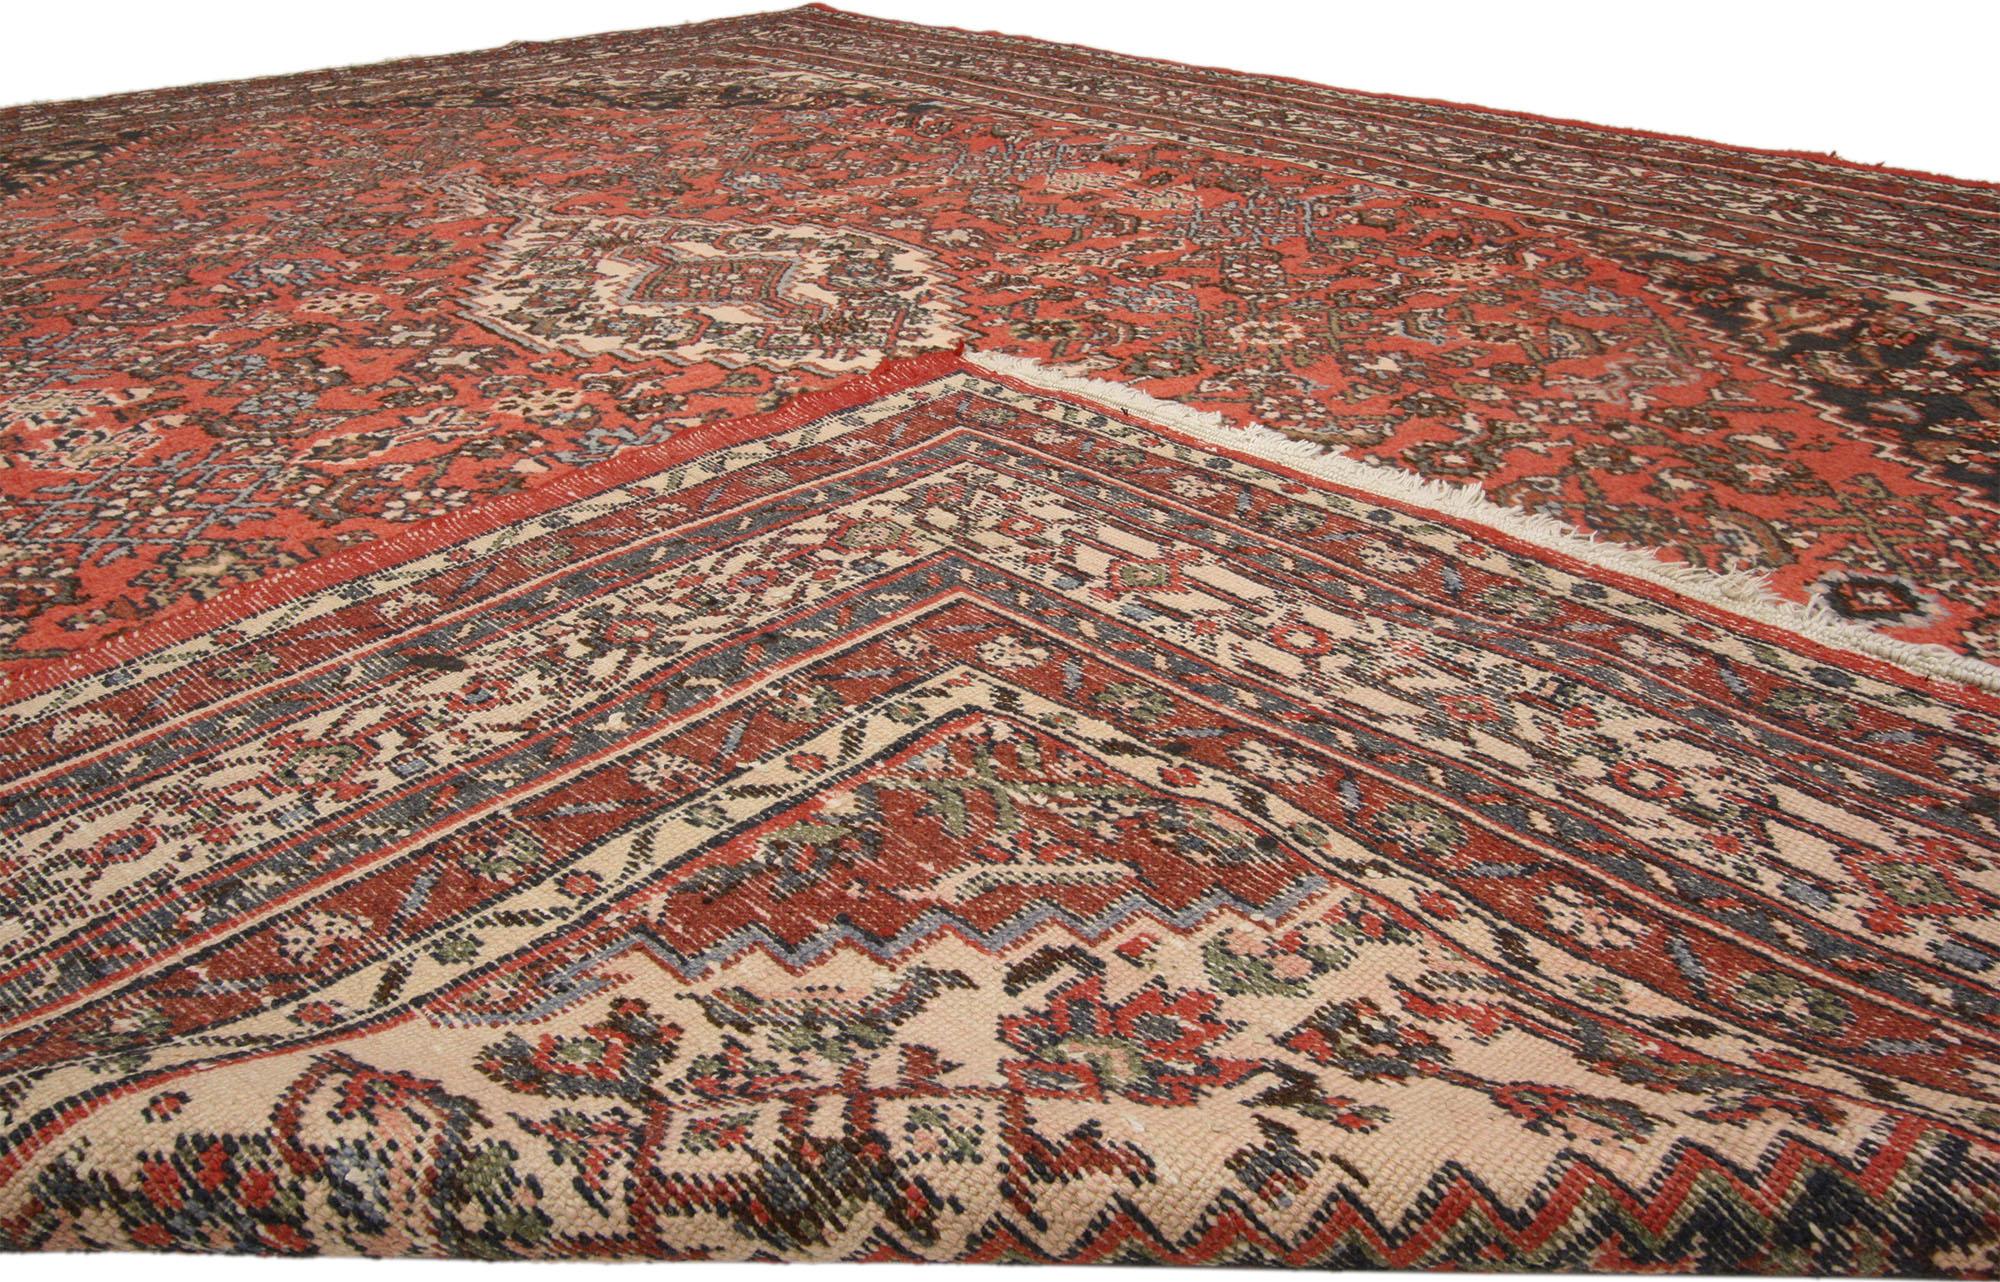 Vintage Hamadan Persian Rug with Traditional Style In Good Condition For Sale In Dallas, TX